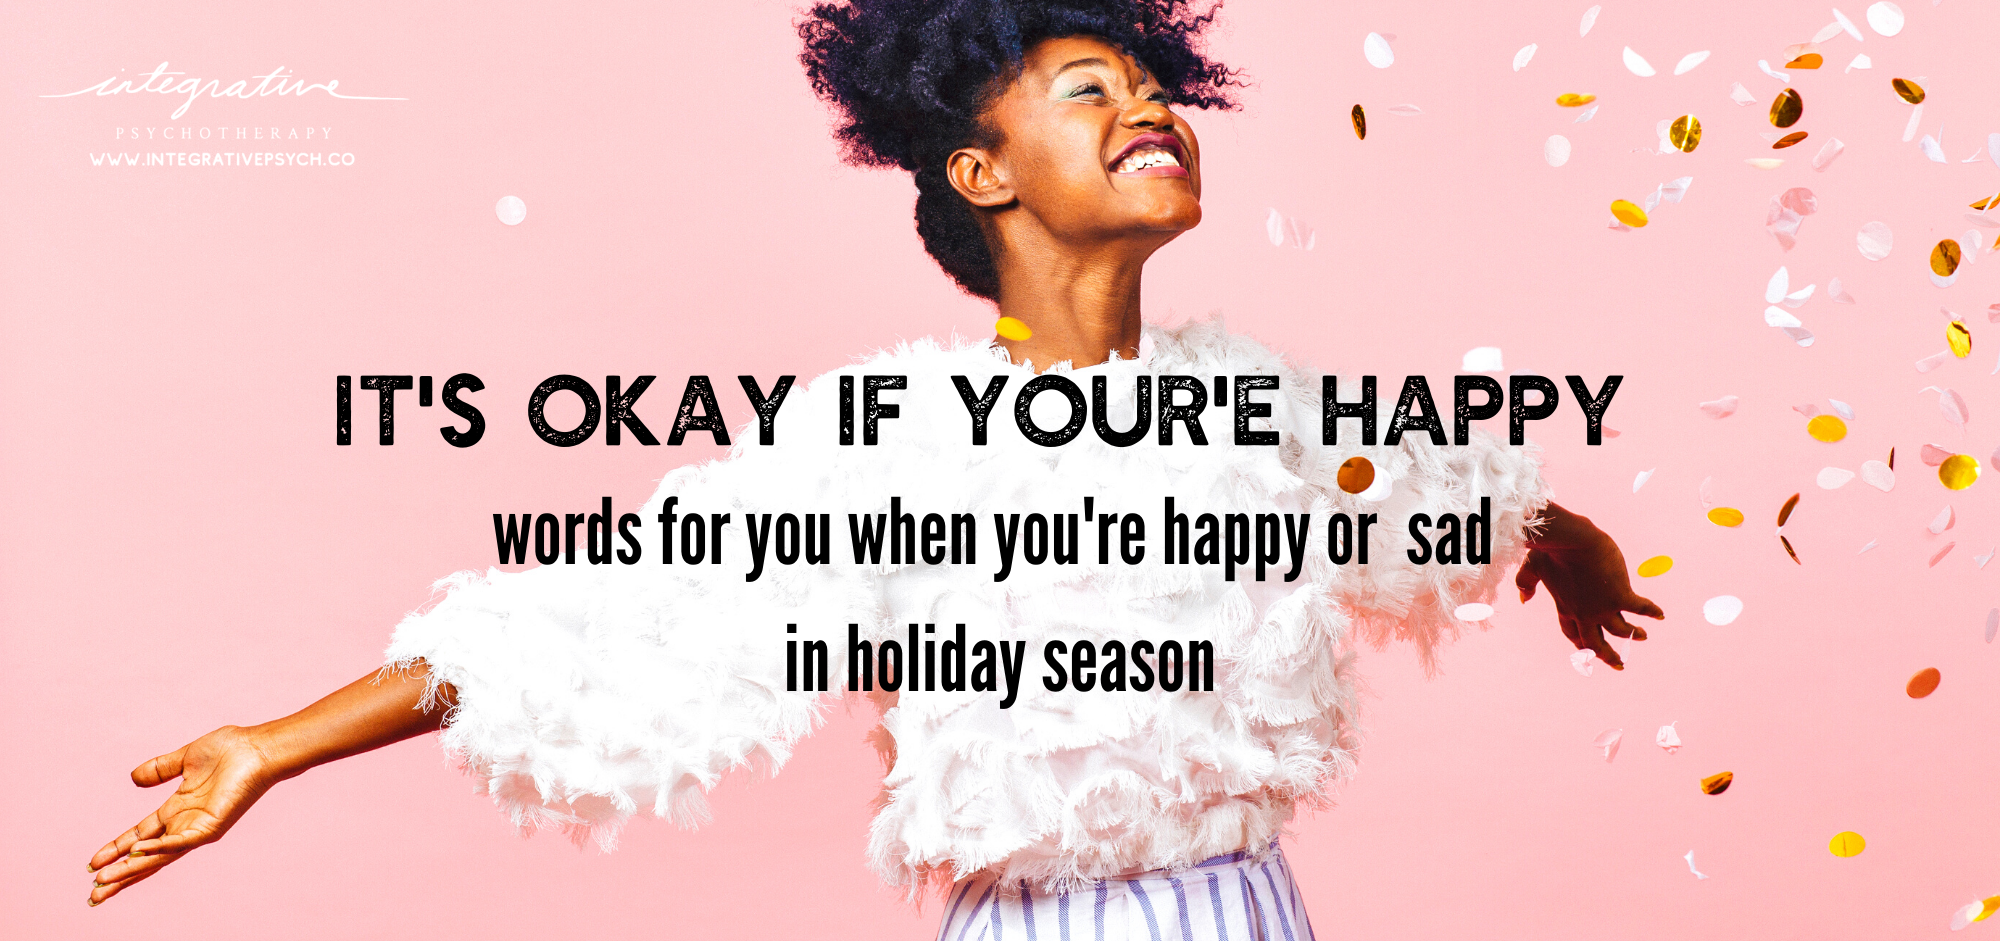 It's Okay to be Happy Too - words for you when you're happy or sad ...